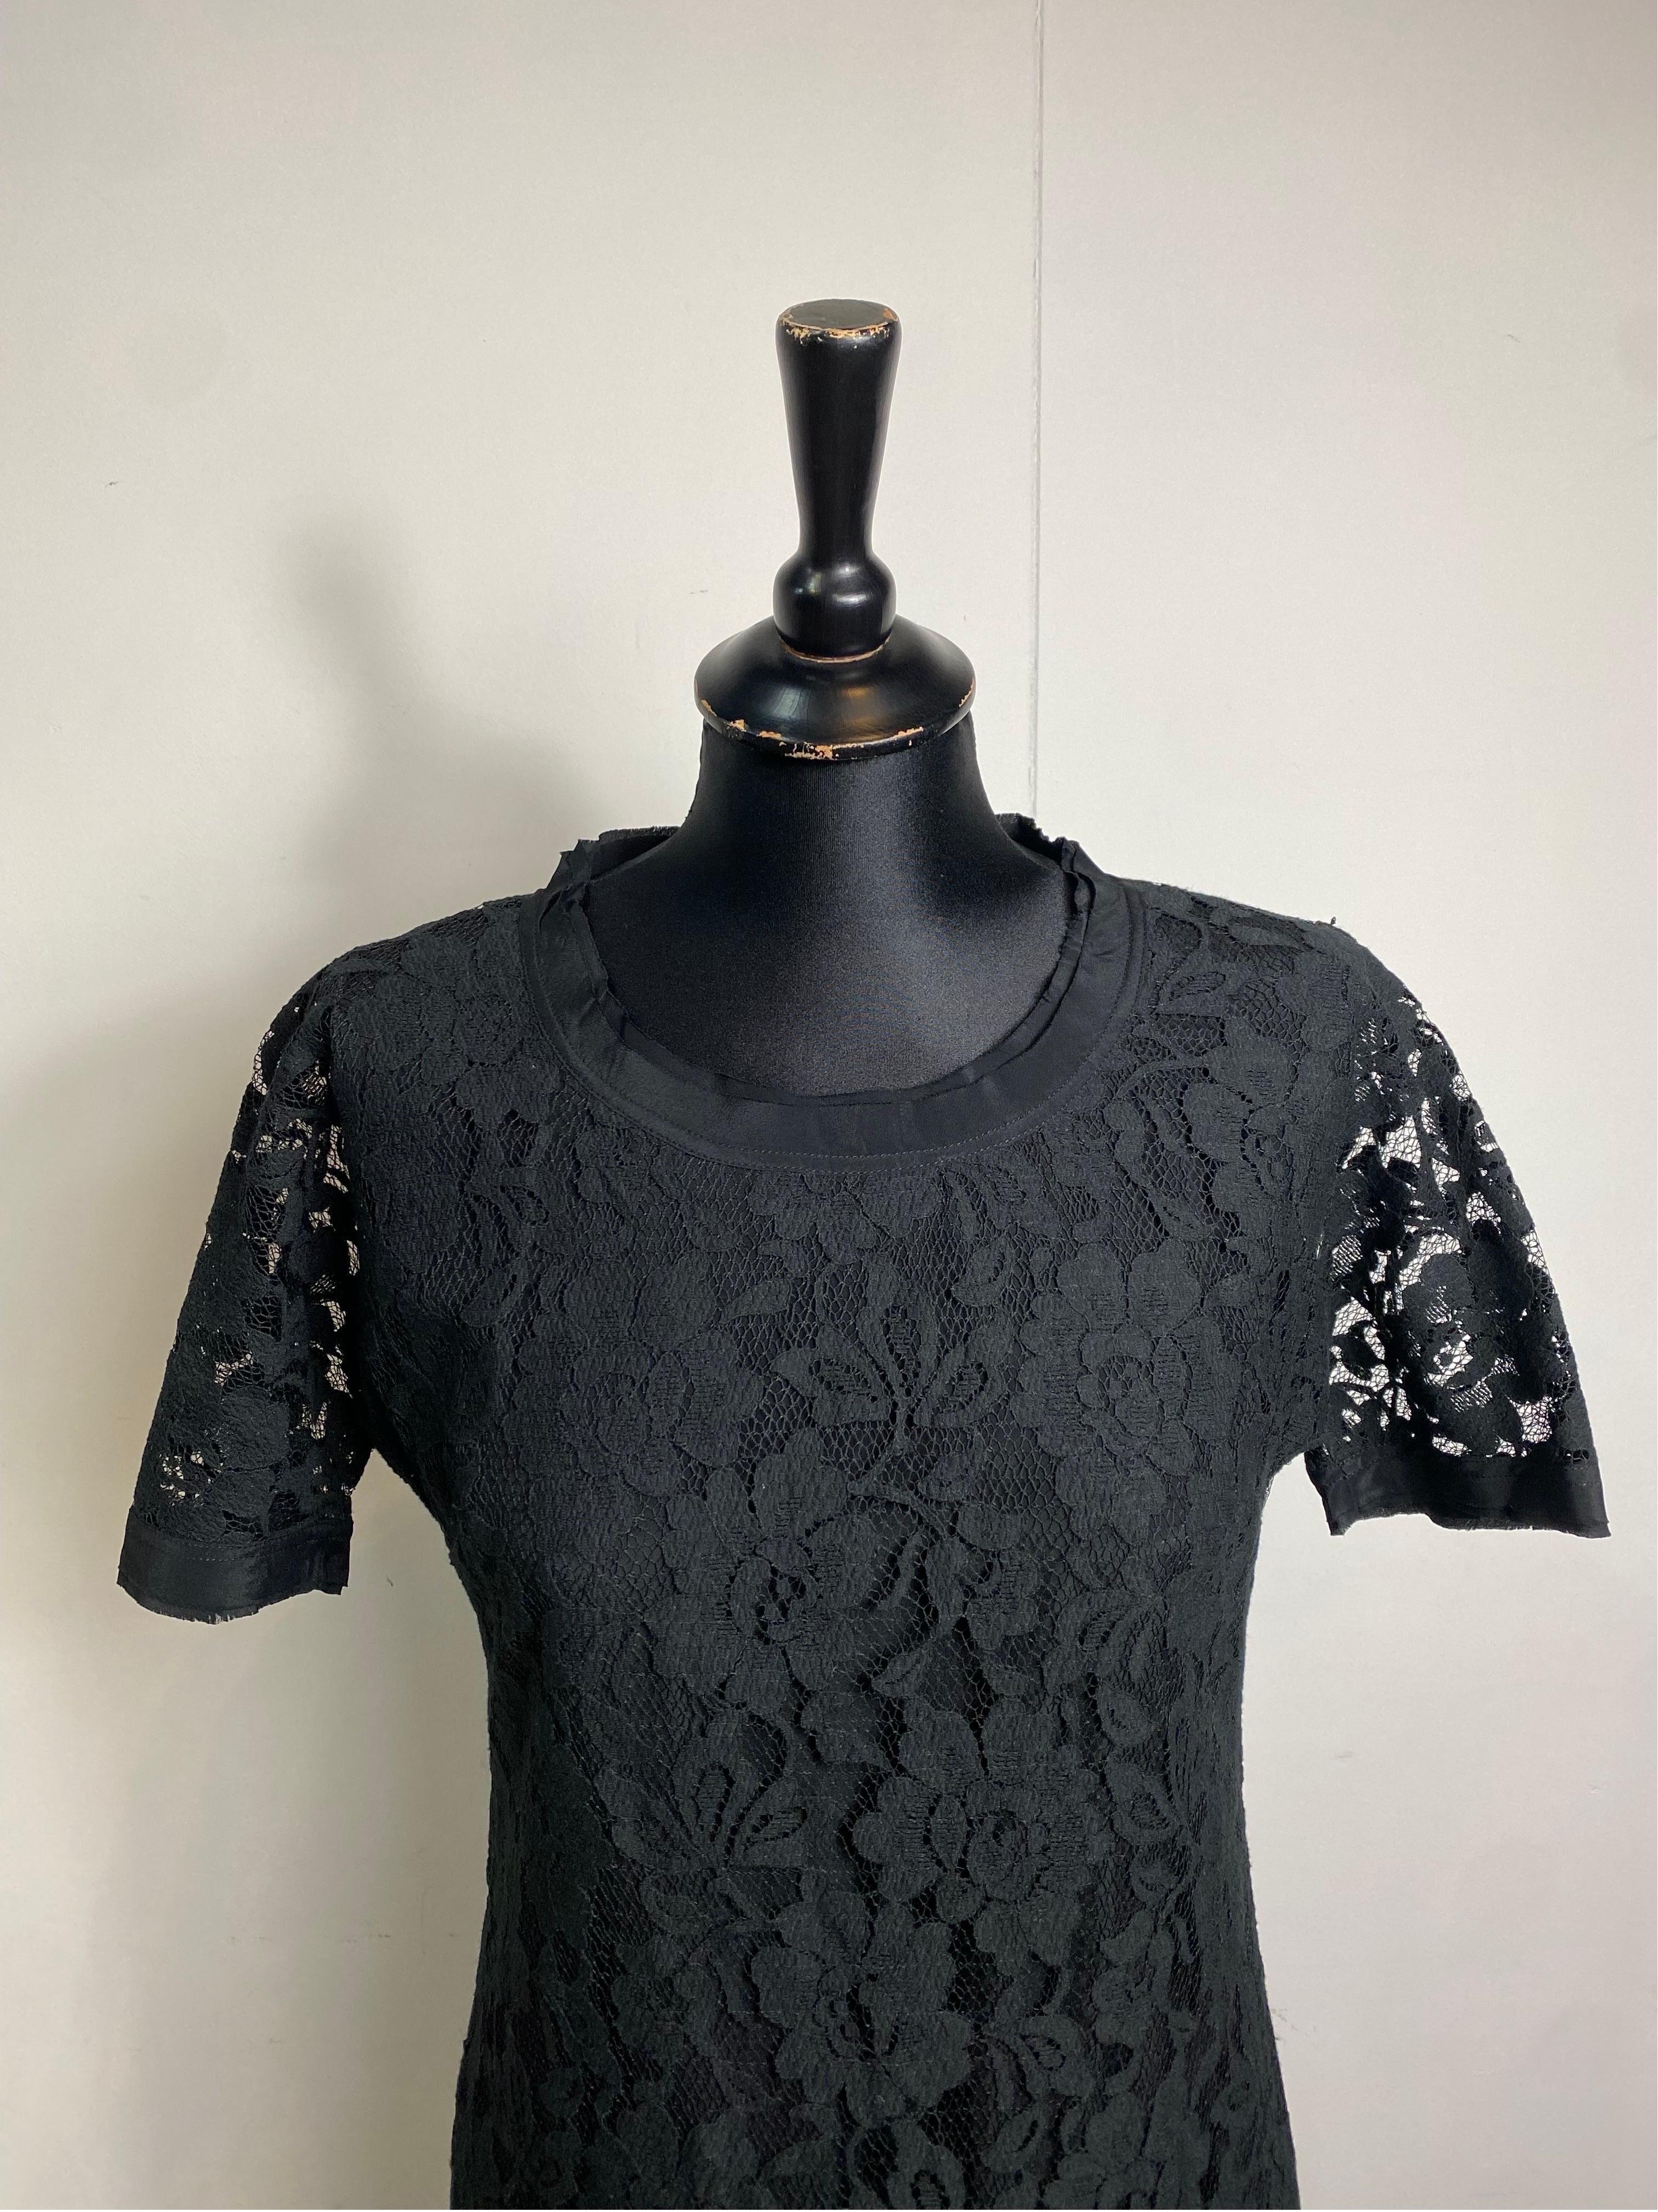 Dolce and Gabbana dress.
In cotton, nylon, silk and acetate. Lined.
Back zip closure.
Italian size 38.
Shoulders 40 cm
Bust 42 cm
Length 90 cm
Very good general condition. It shows minimal signs of normal use and some pulled threads.